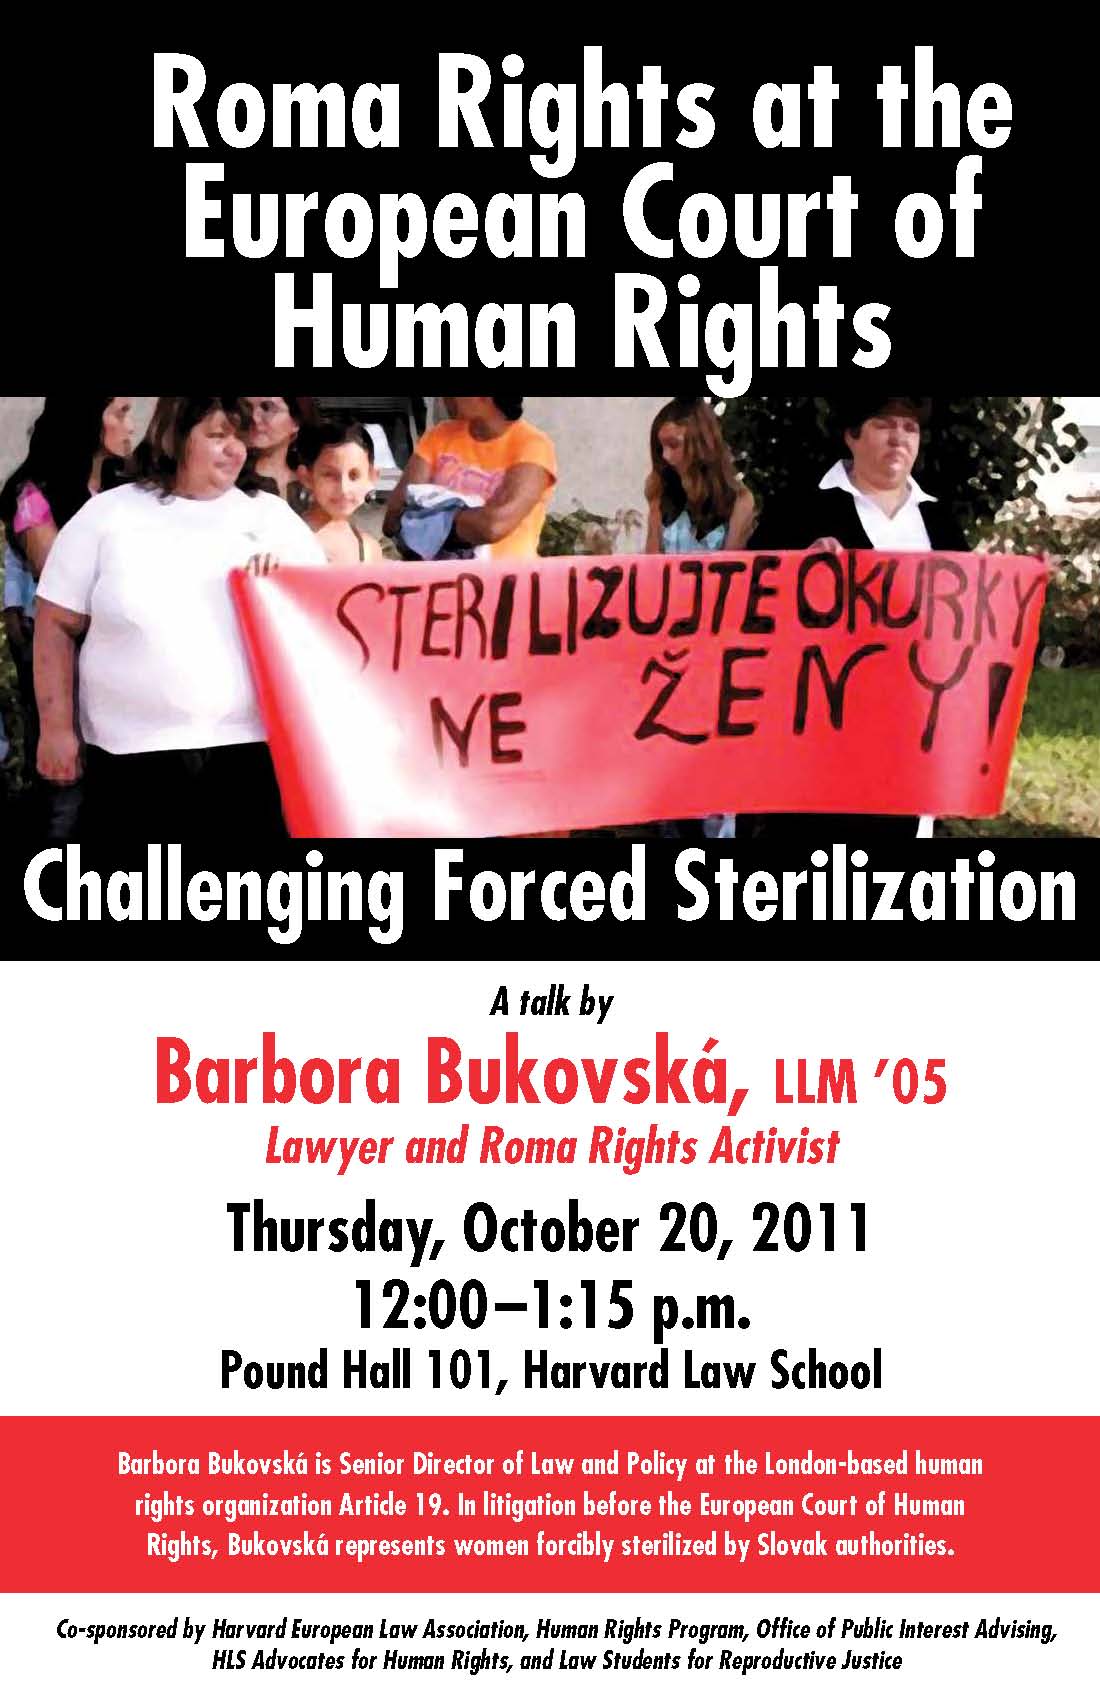 Event Poster showcases a protest photo of women holding a banner in Romanian protesting sterilization.